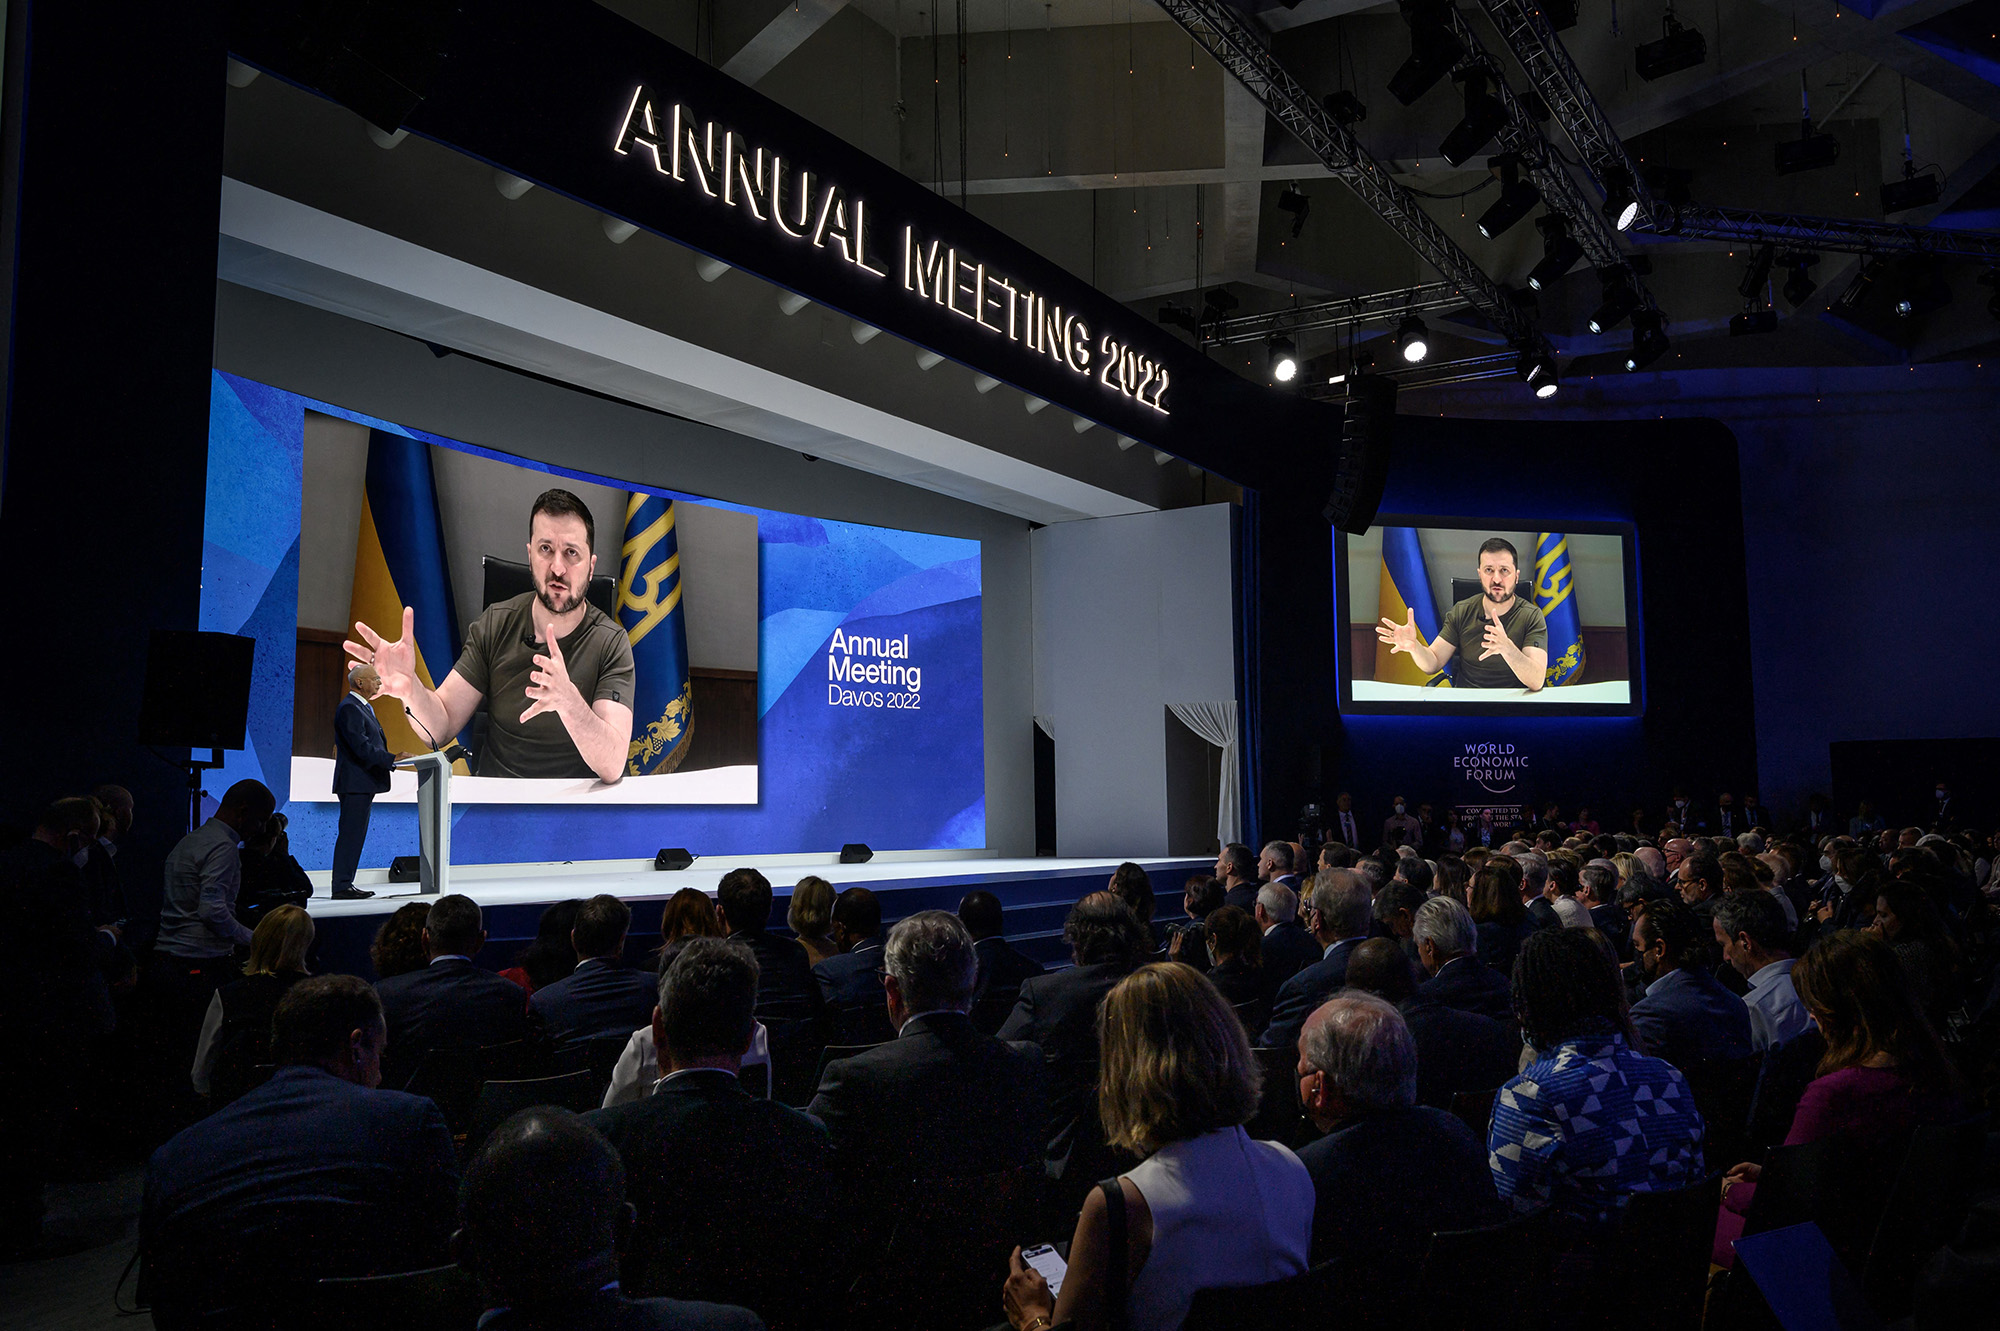 Ukrainian President Volodymyr Zelensky is seen on a giant screen during his address by video conference as part of the World Economic Forum (WEF) annual meeting in Davos, Switzerland, on May 23.